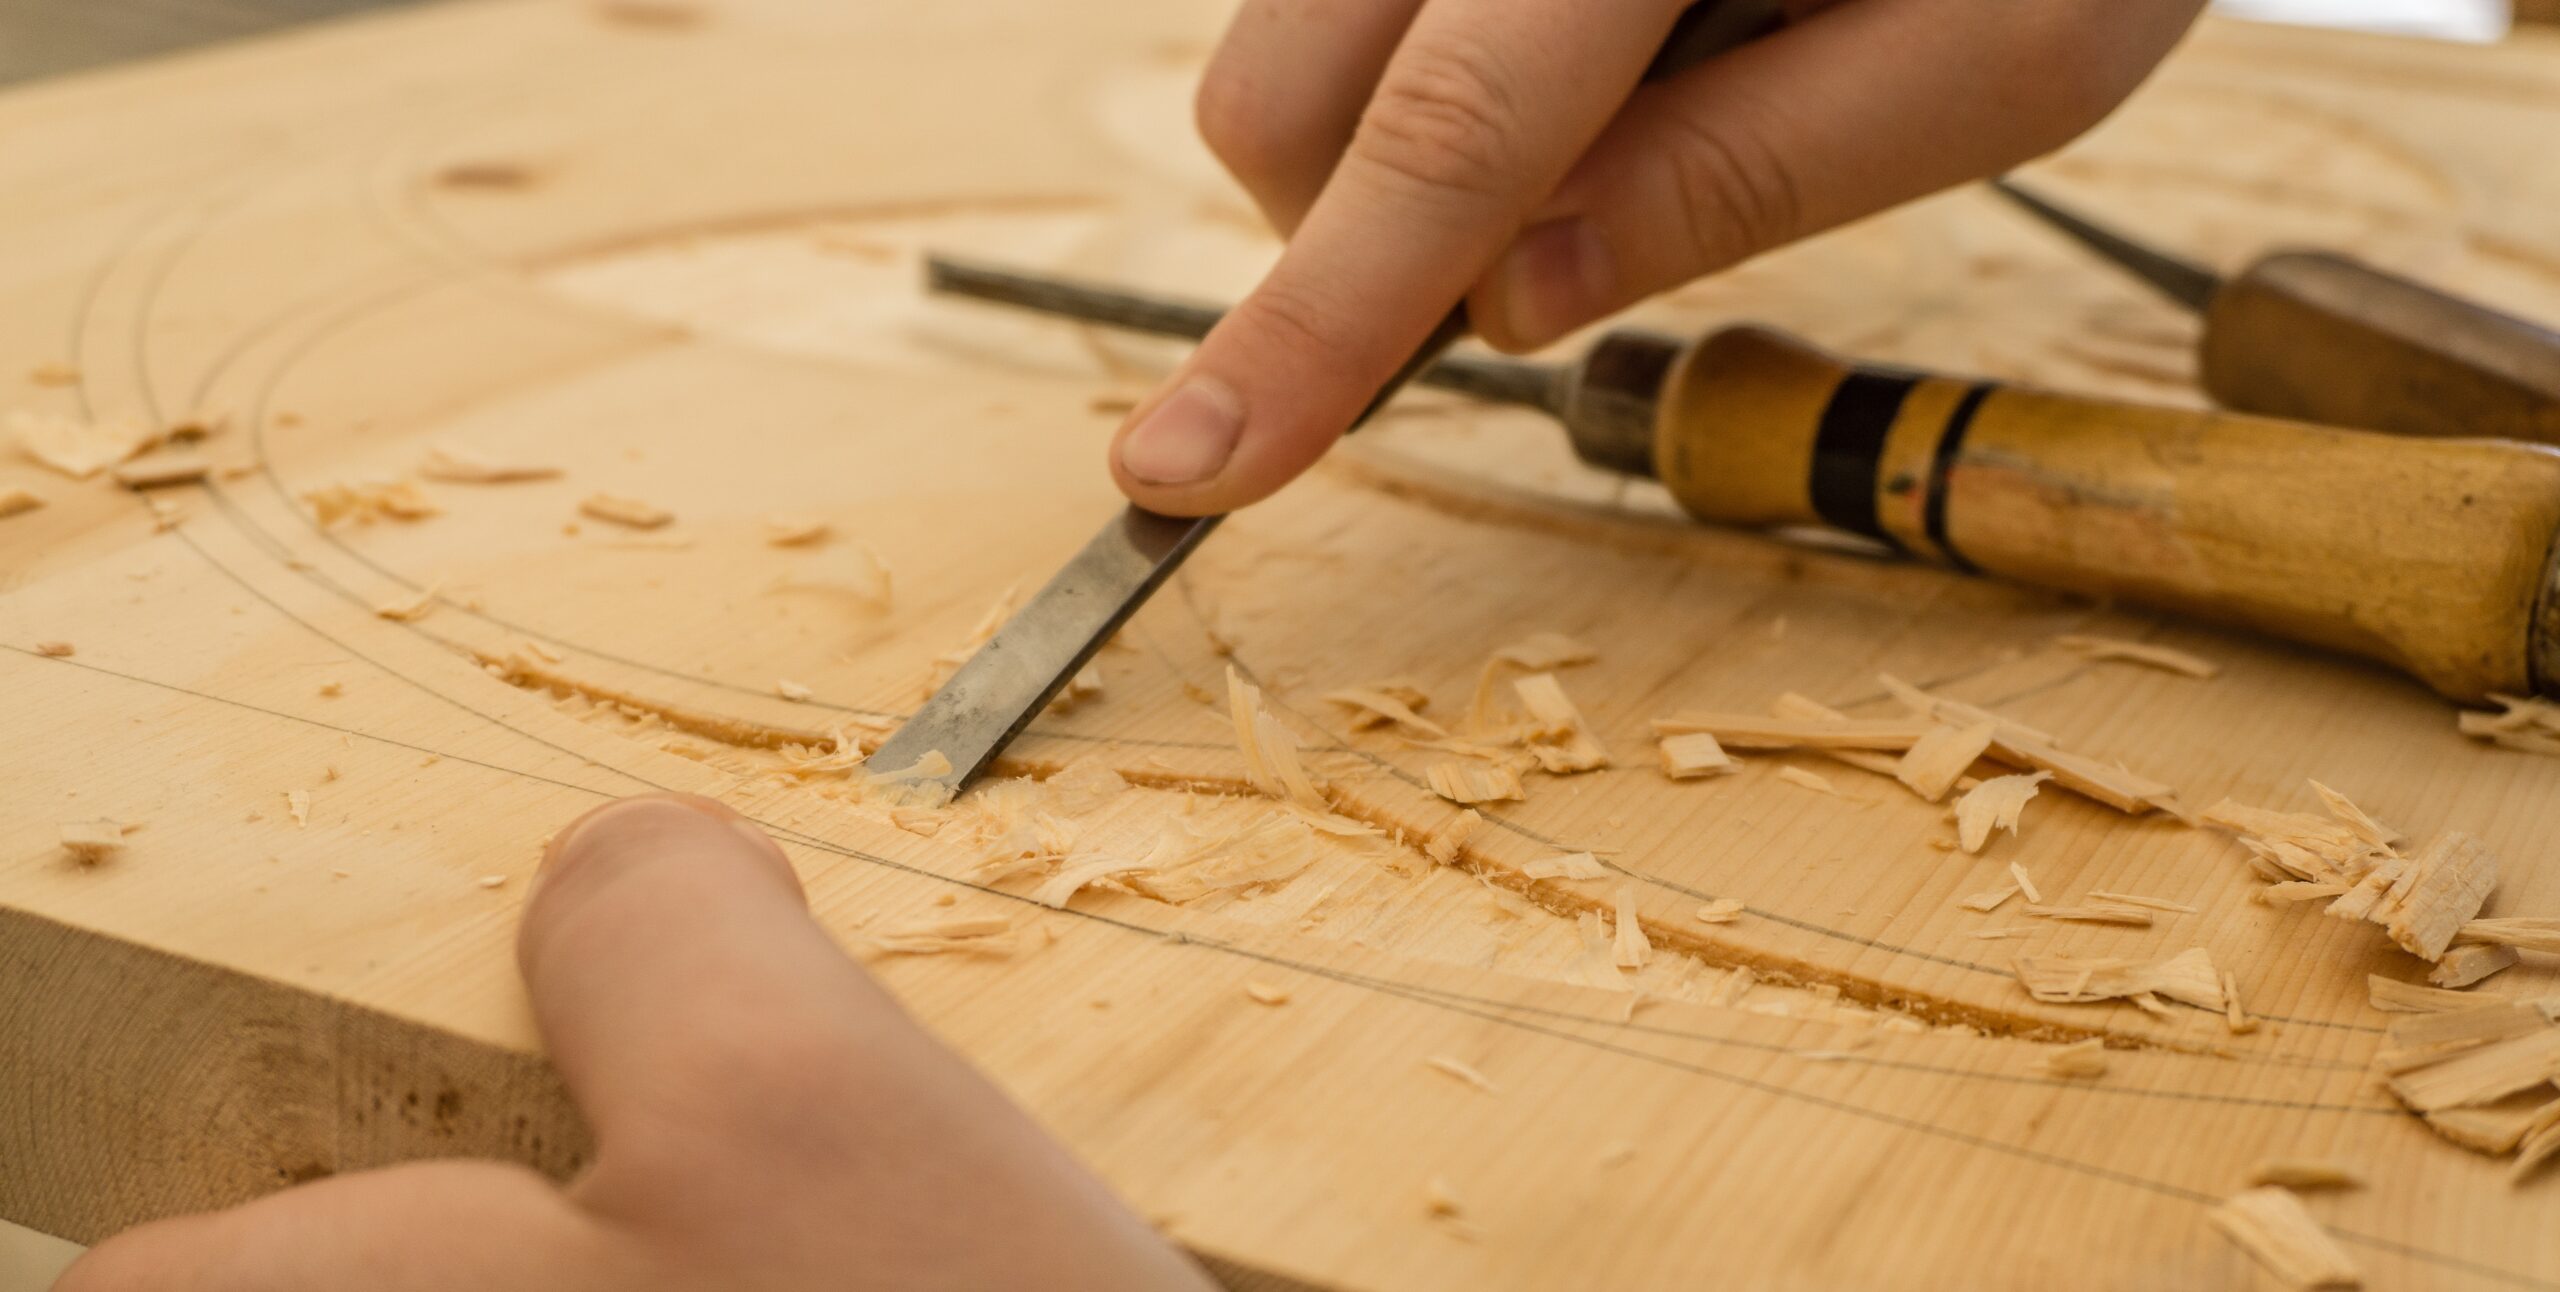 Crafting for Stress Relief: How Creative Activities Can Improve Wellbeing